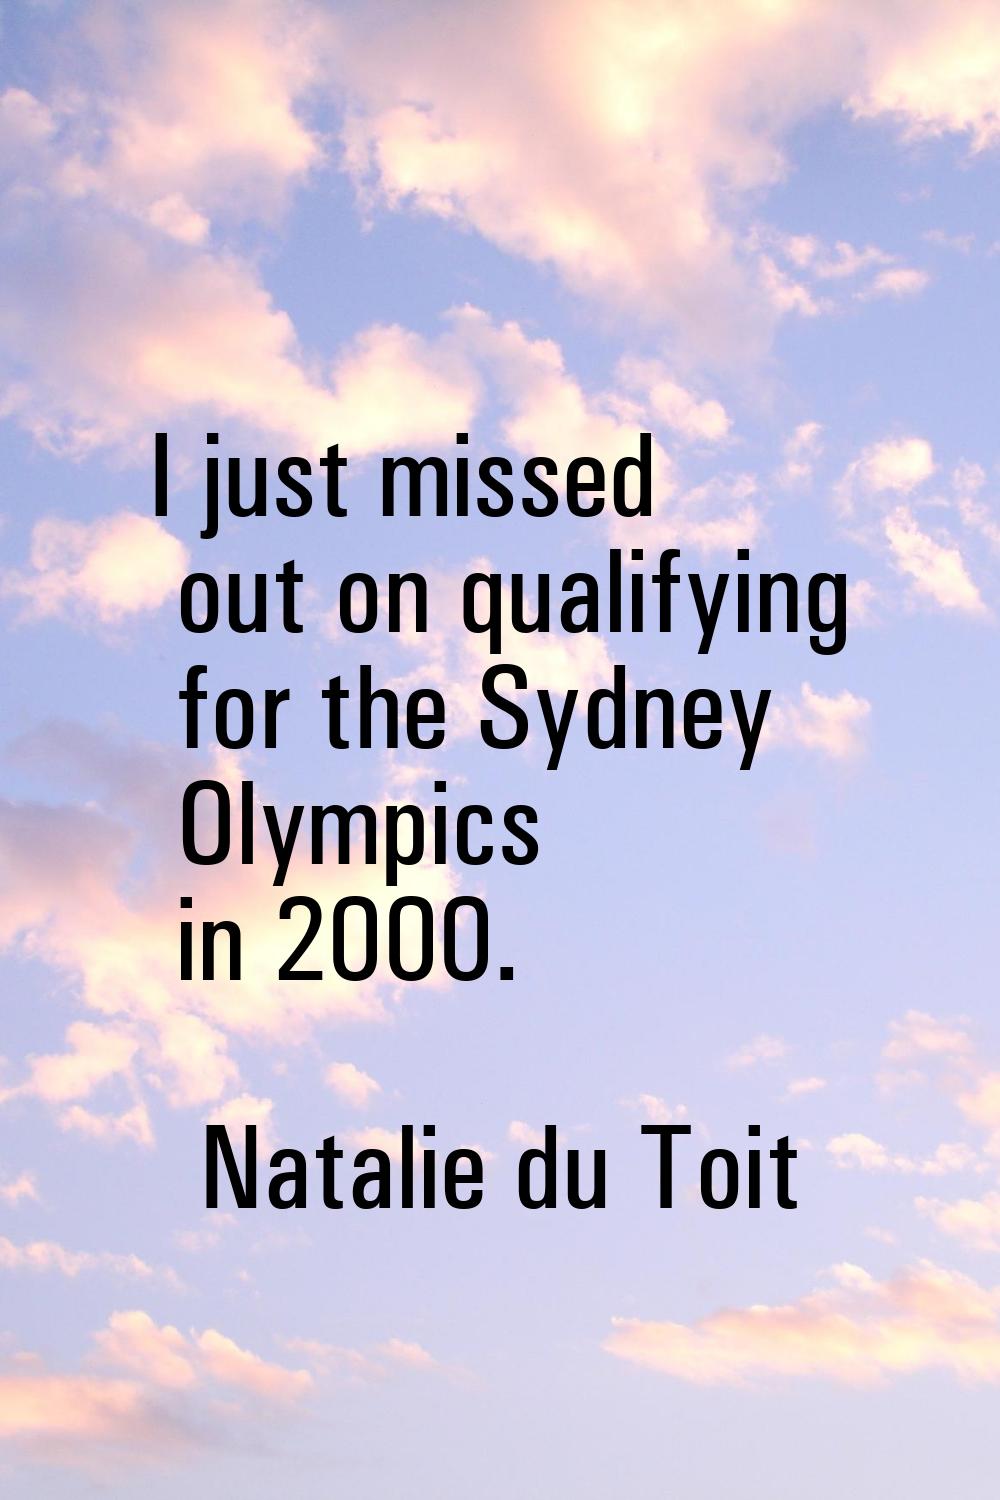 I just missed out on qualifying for the Sydney Olympics in 2000.